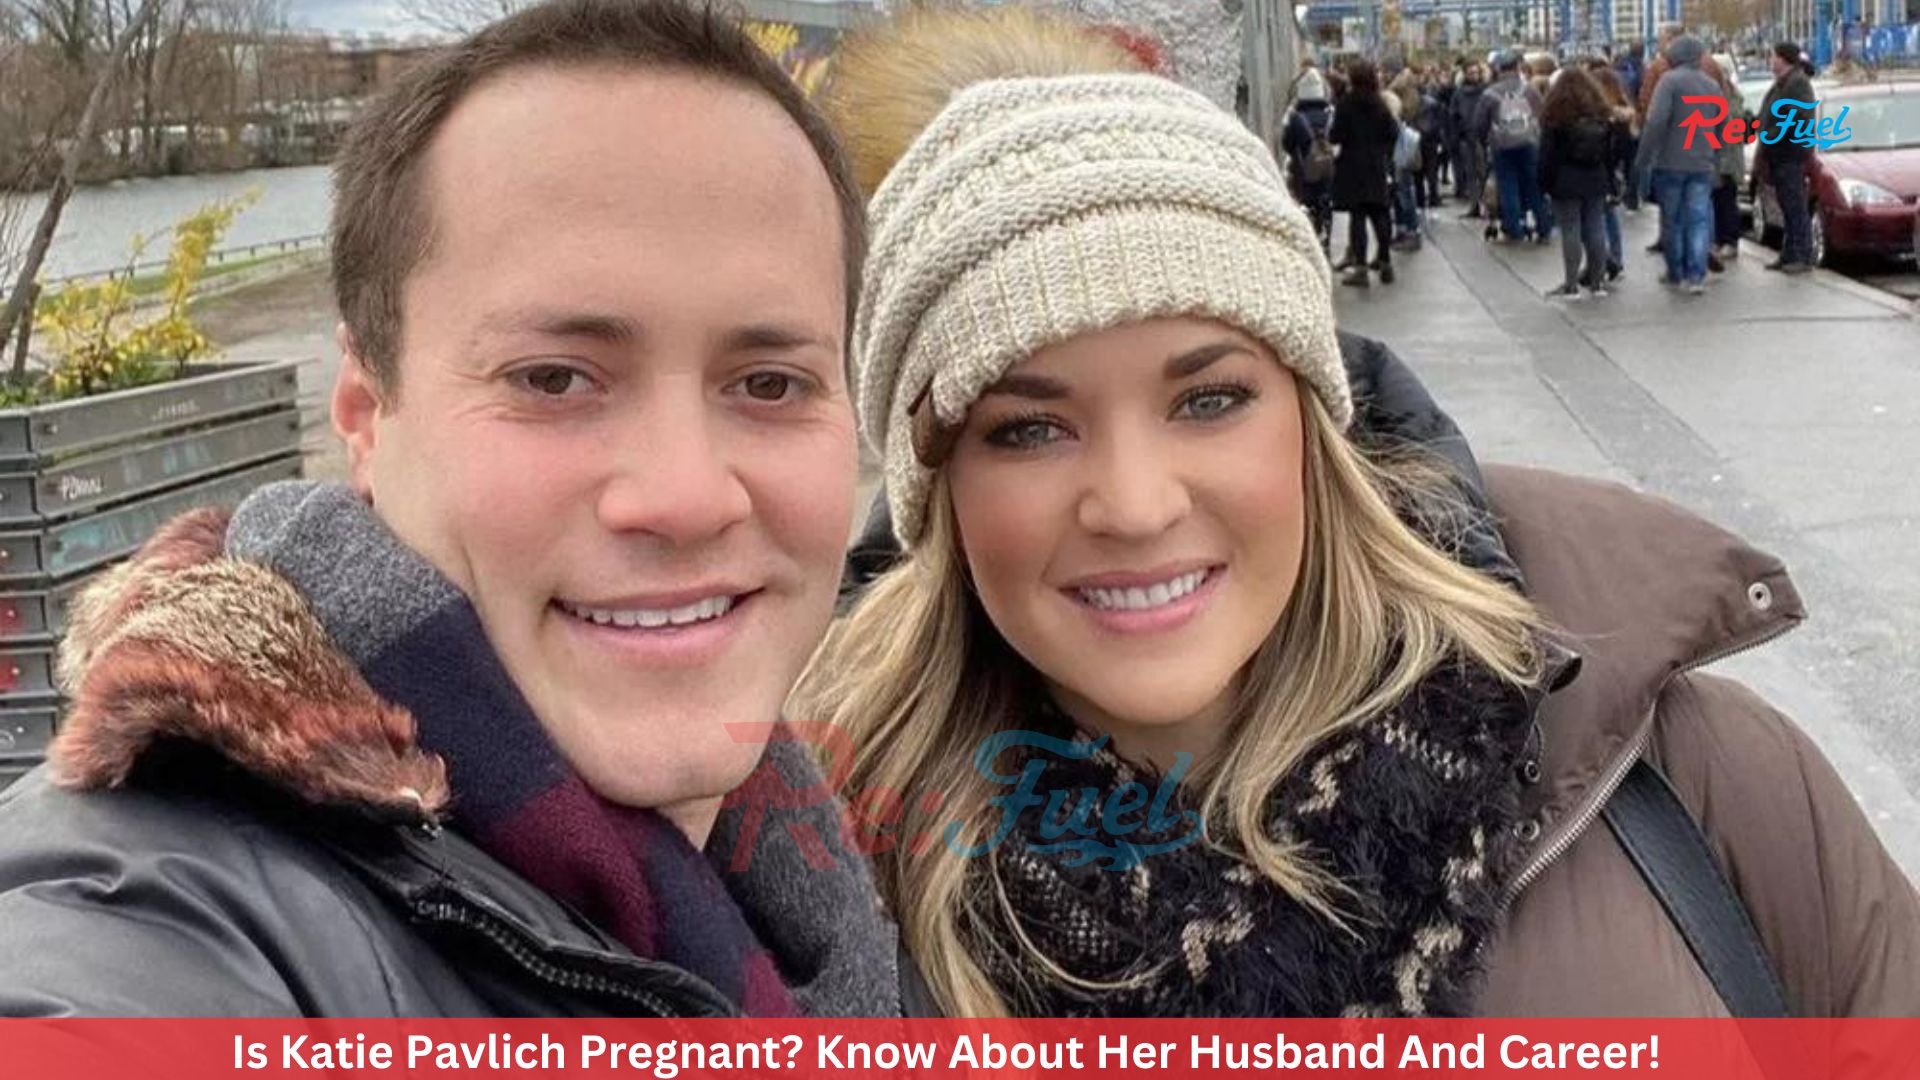 Is Katie Pavlich Pregnant? Know About Her Husband And Career!